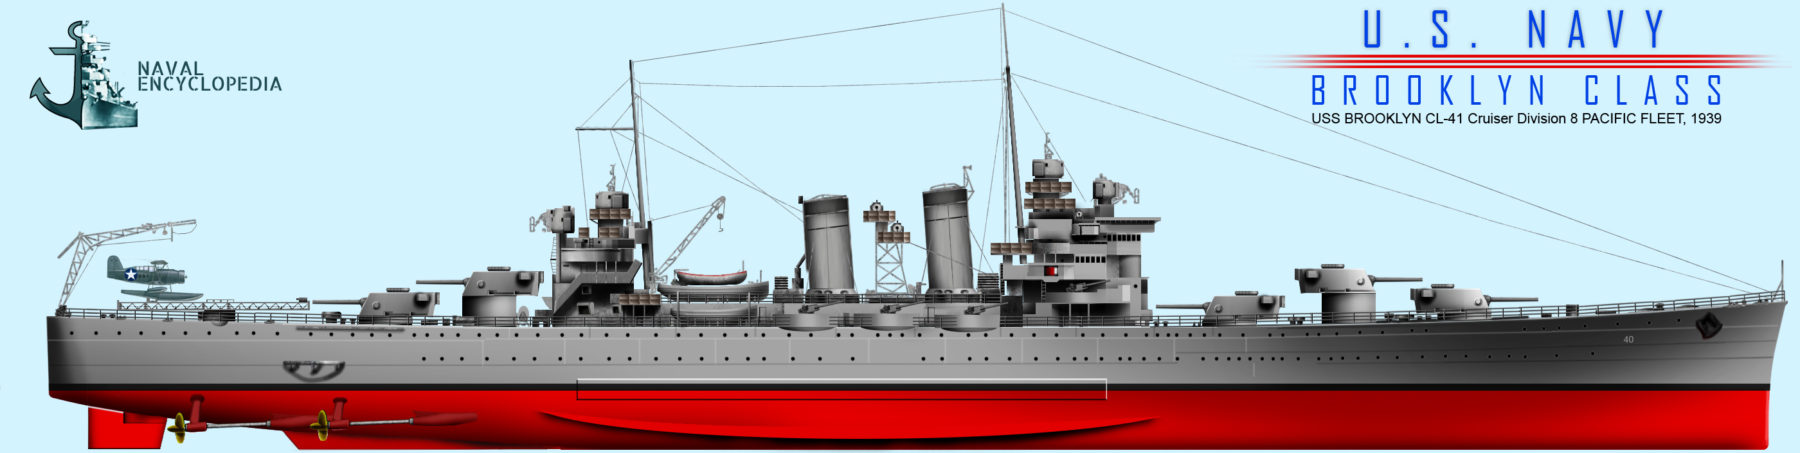 Brooklyn class light cruisers - First of a new breed of US cruiser